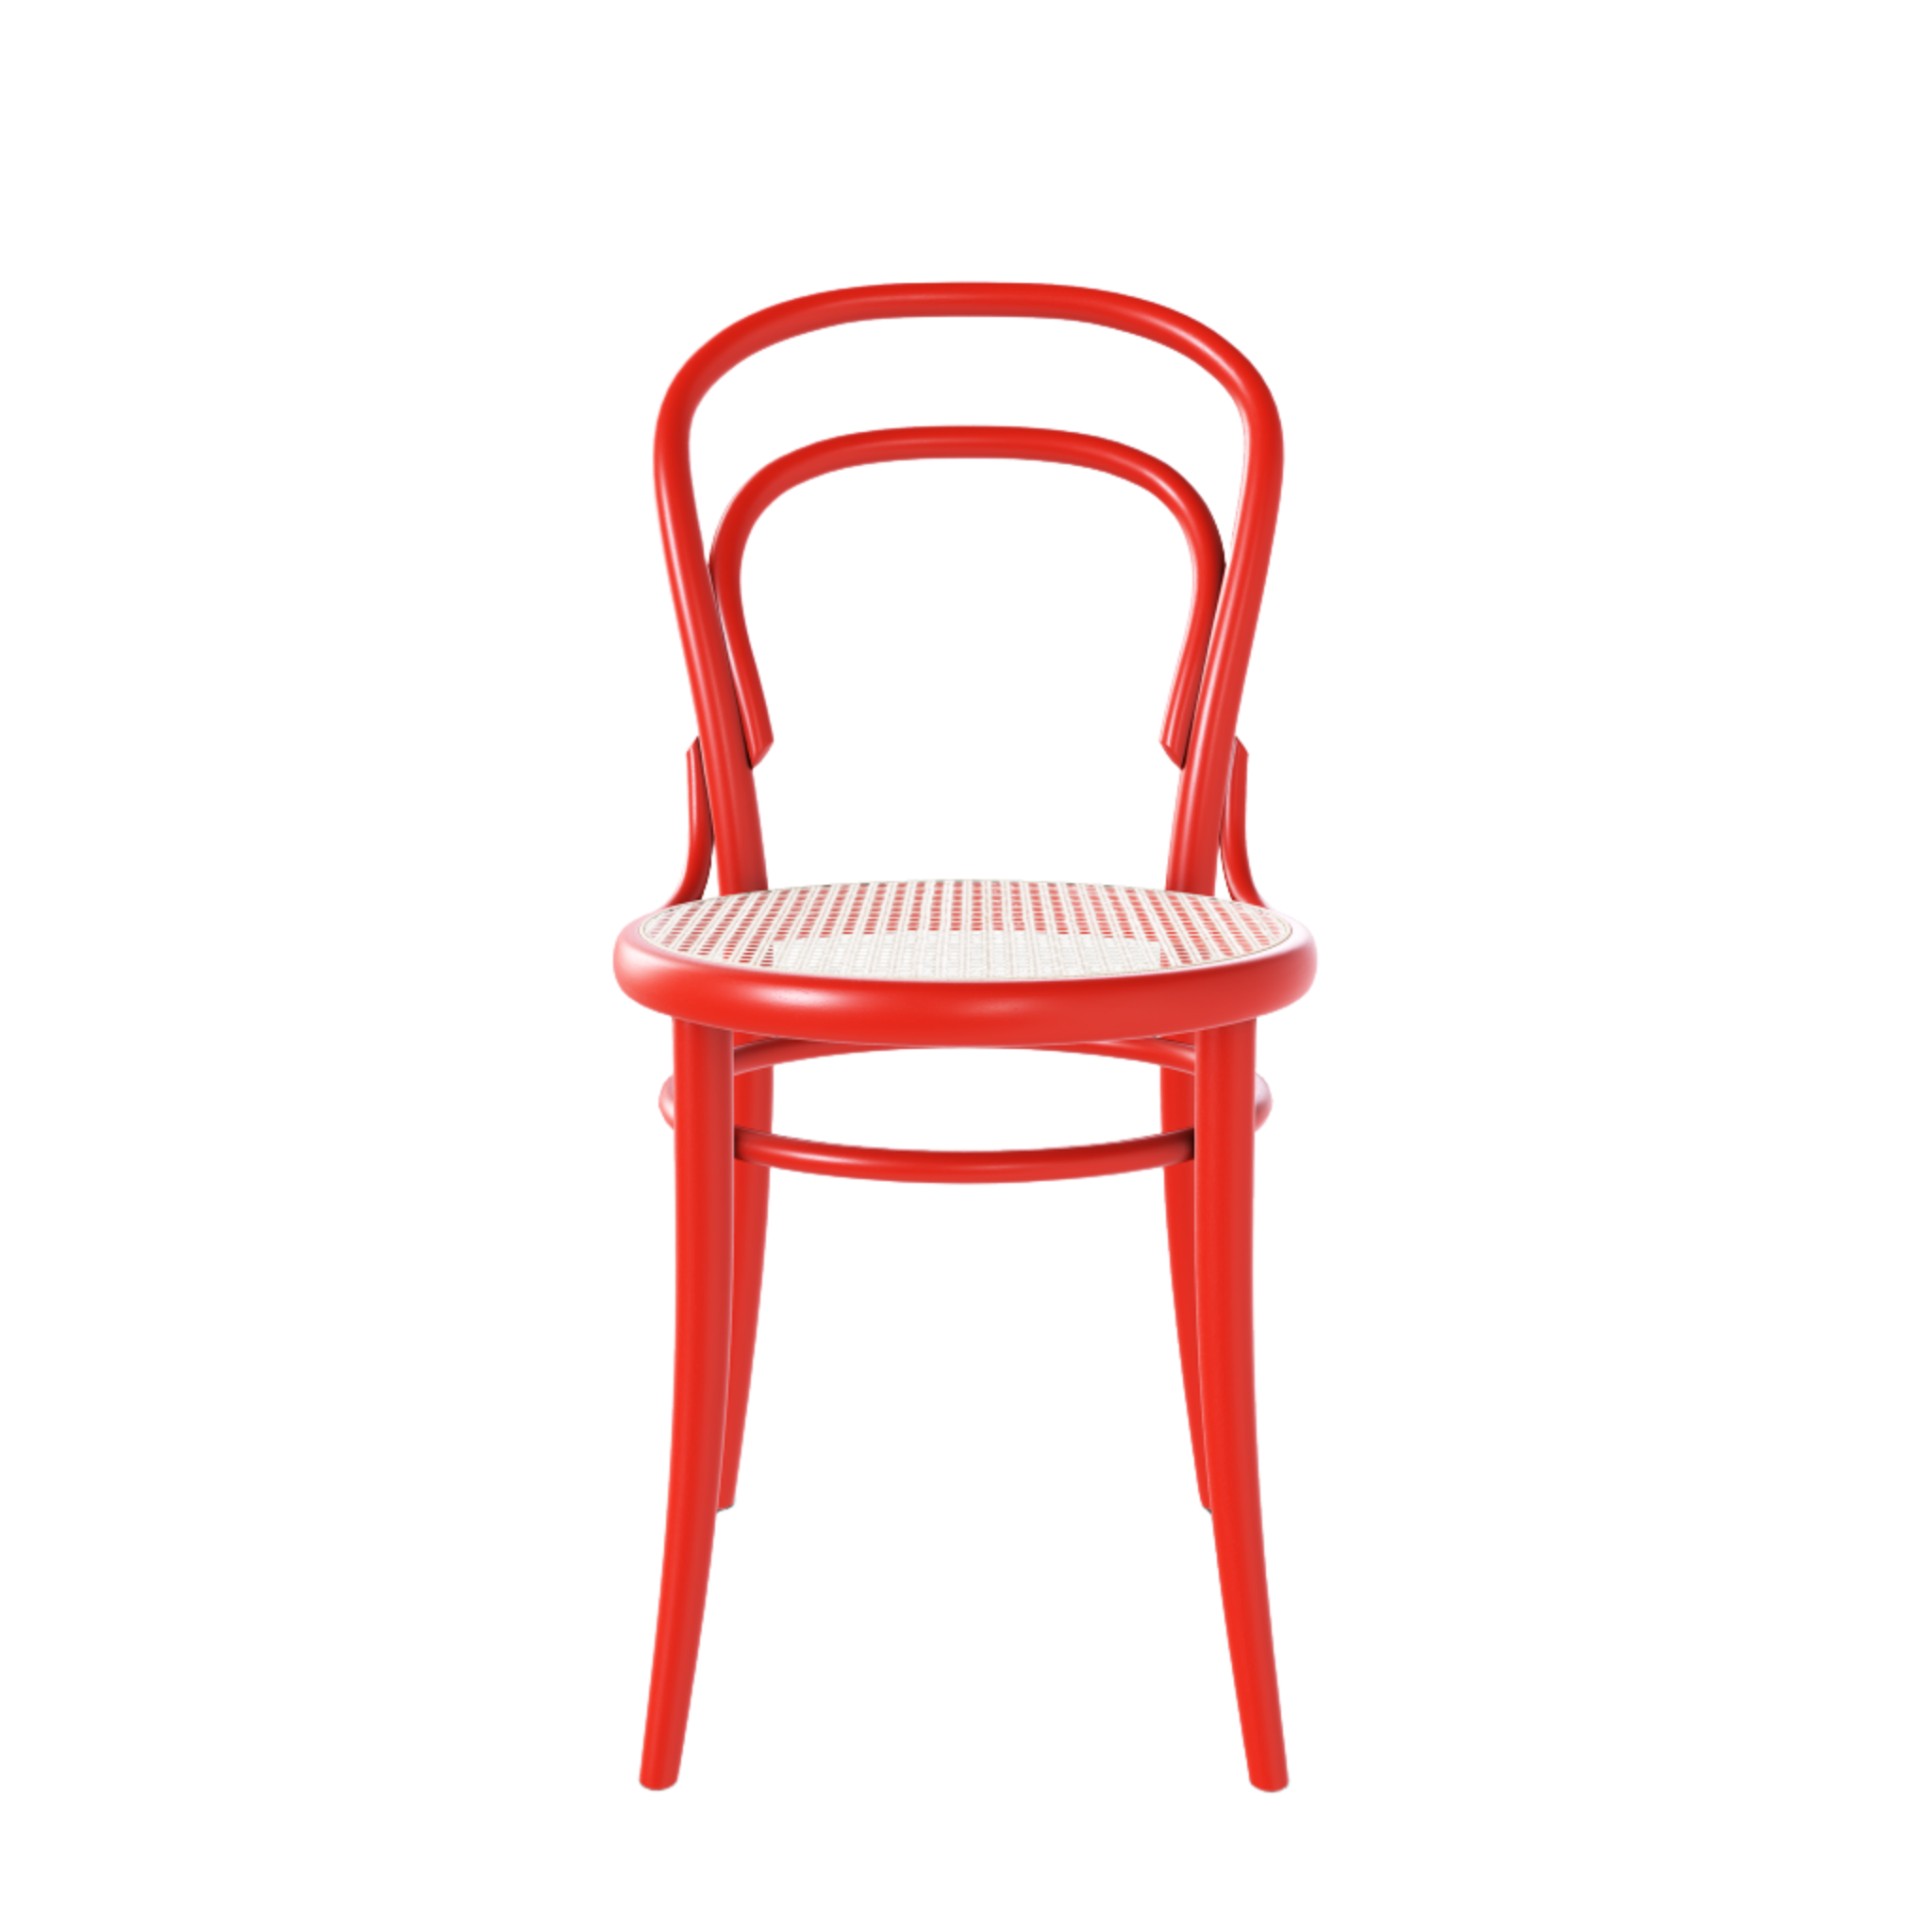 Ton 14 Dining Chair with cane seat in  factory red